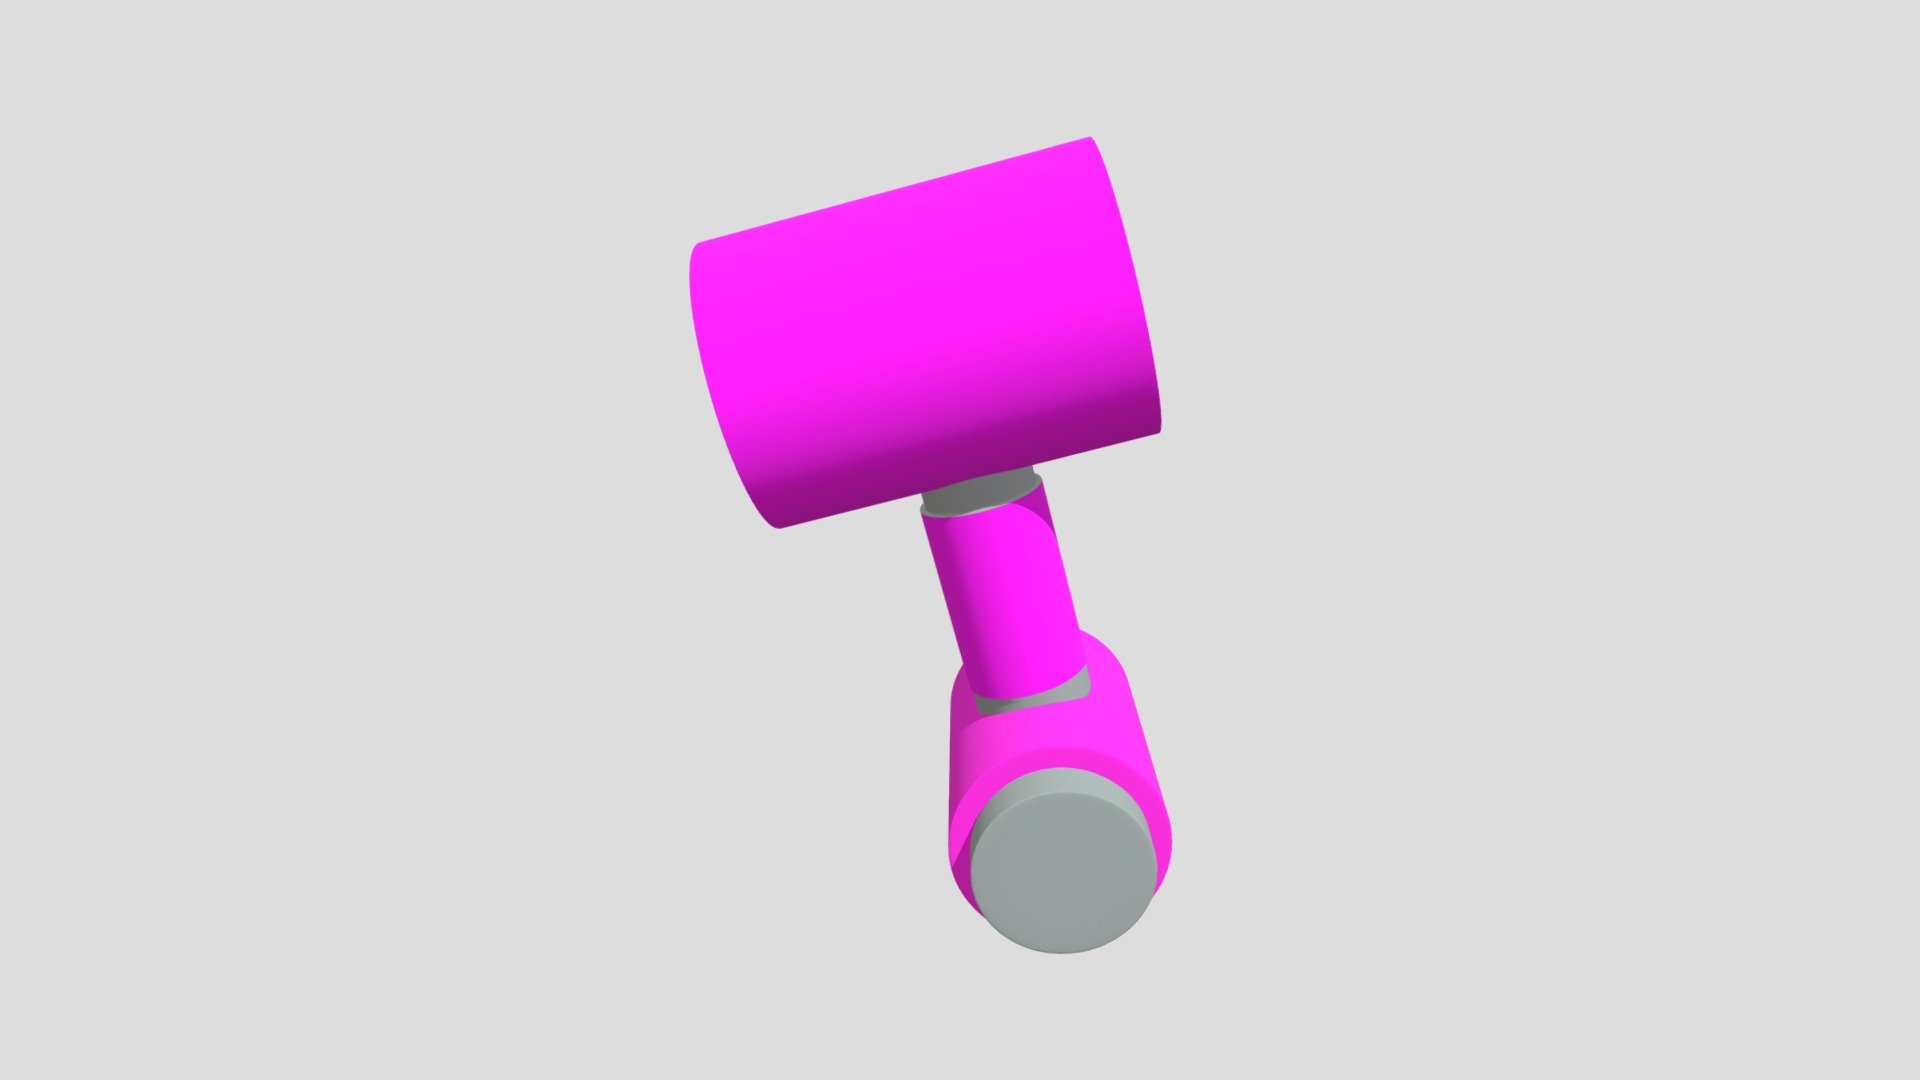 This is one of the spinning hammers that you encounter in Fall Guys I hope you like it 

My Youtube https://www.youtube.com/results?search_query=OrangeRoomCreations - Spinning Hammer From Fall Guys - Download Free 3D model by lukus1 3d model